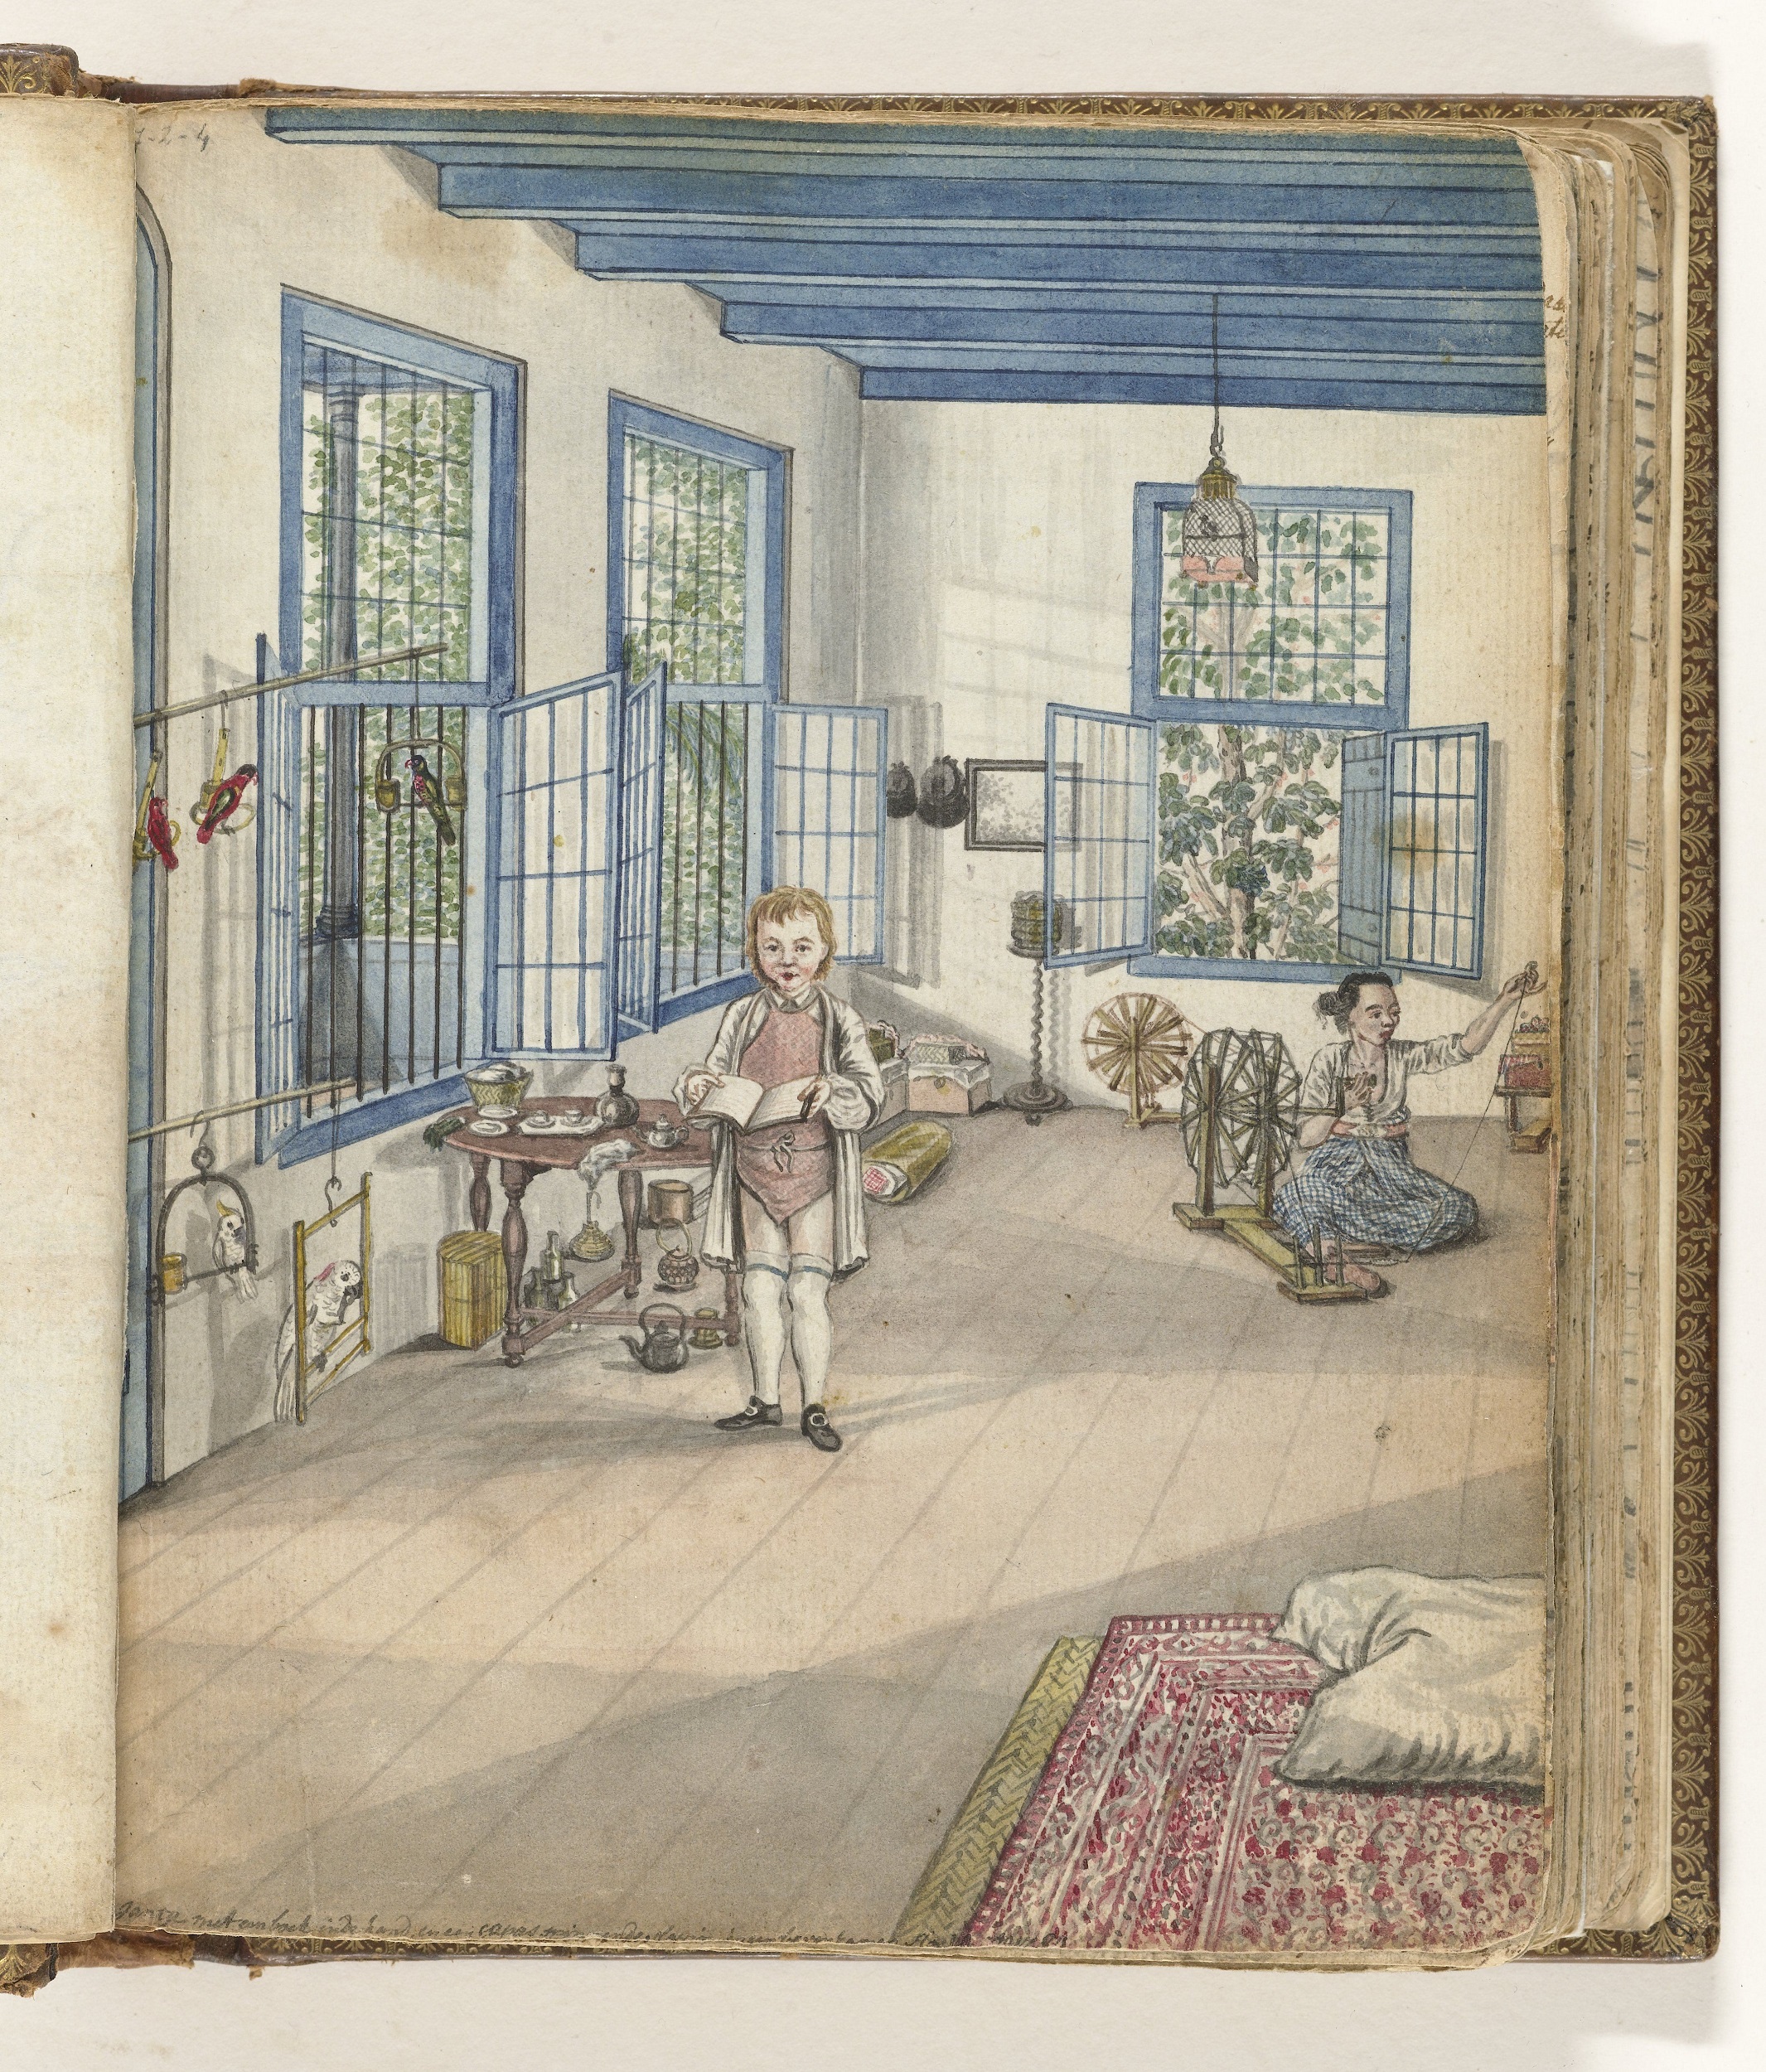 Watercolor of a domestic interior, with a blond boy holding a book in the foreground and a dark-haired woman using a spinning wheel in the background